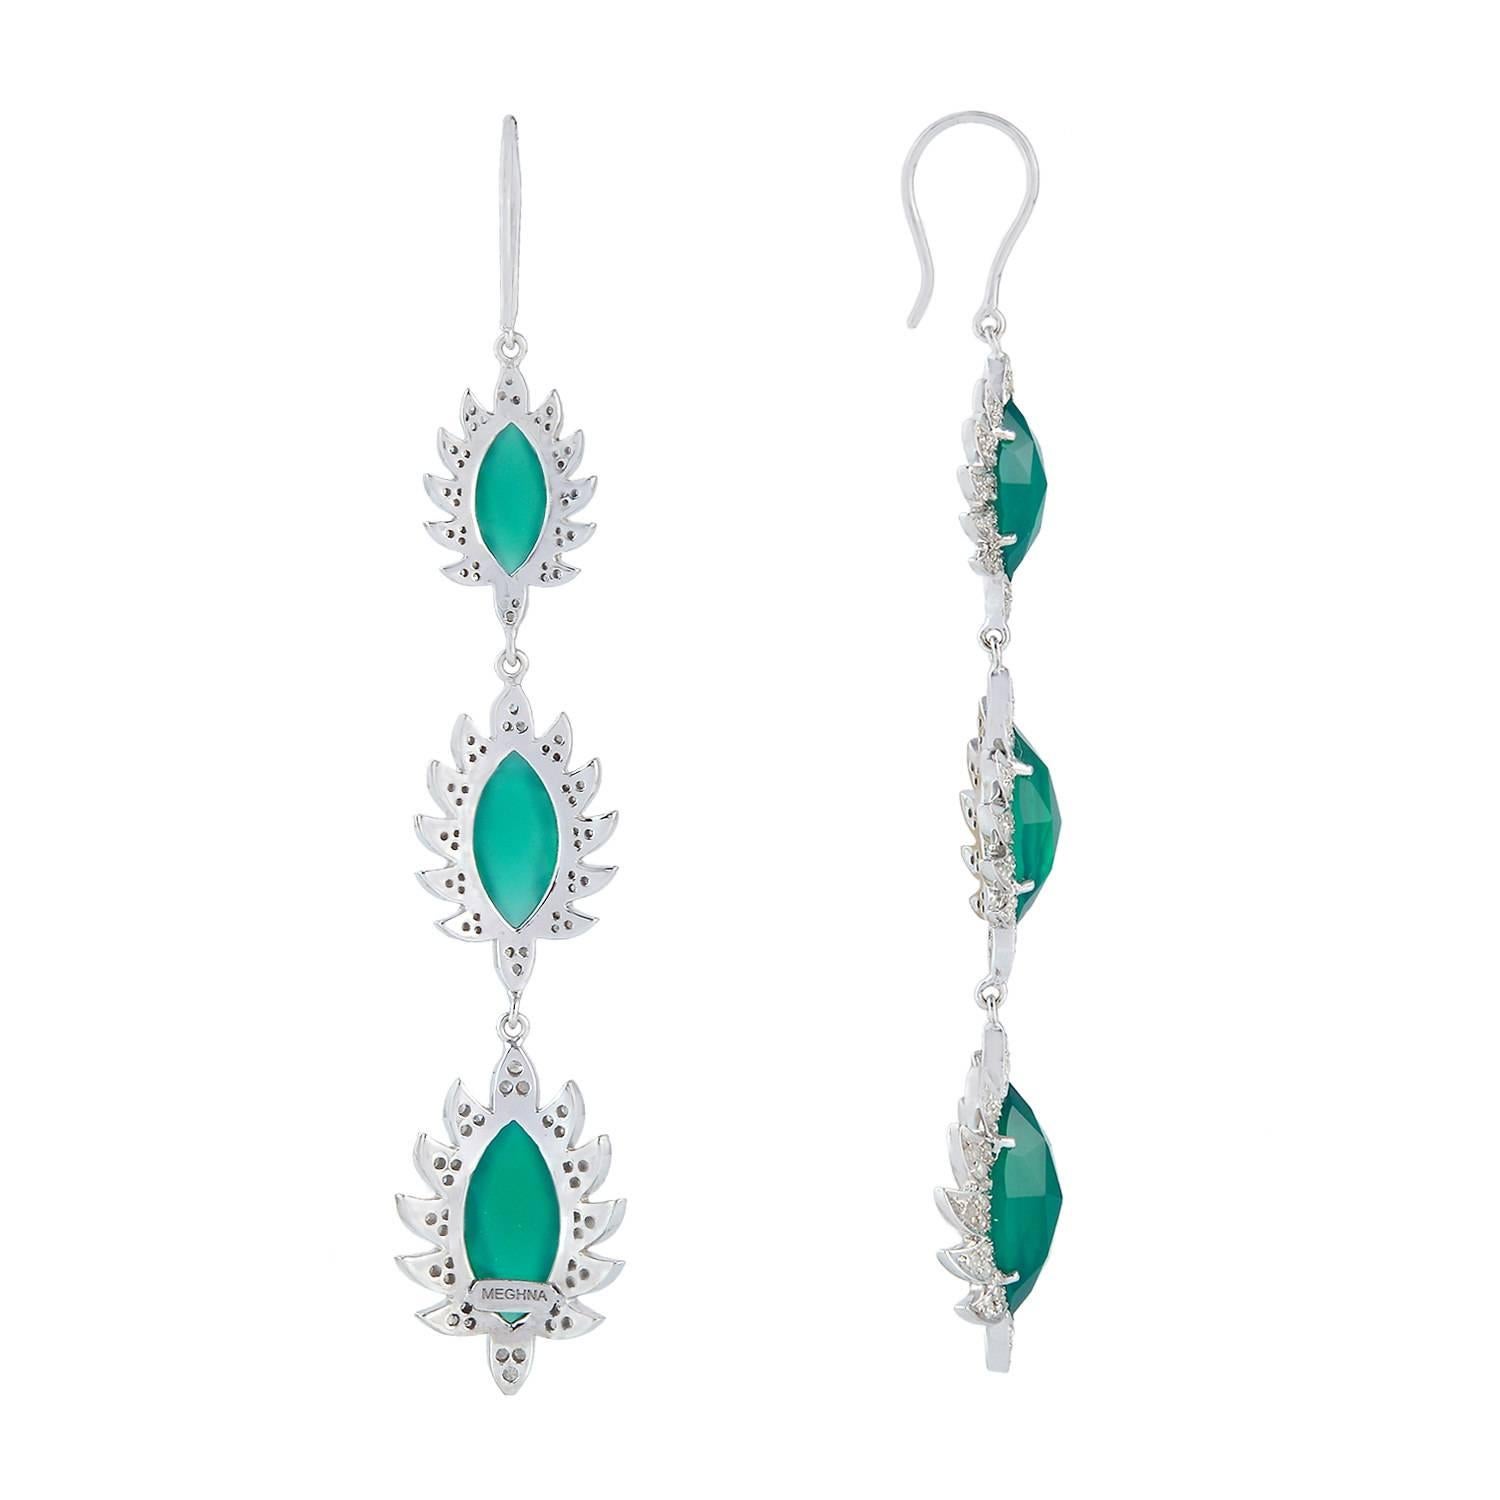 These beautiful triple drop earrings are cast in 18K gold and sterling silver. It is hand set in 11.73 carat green onyx and 1.54 carat of sparkling diamonds, french hook closures. Framed in signature 